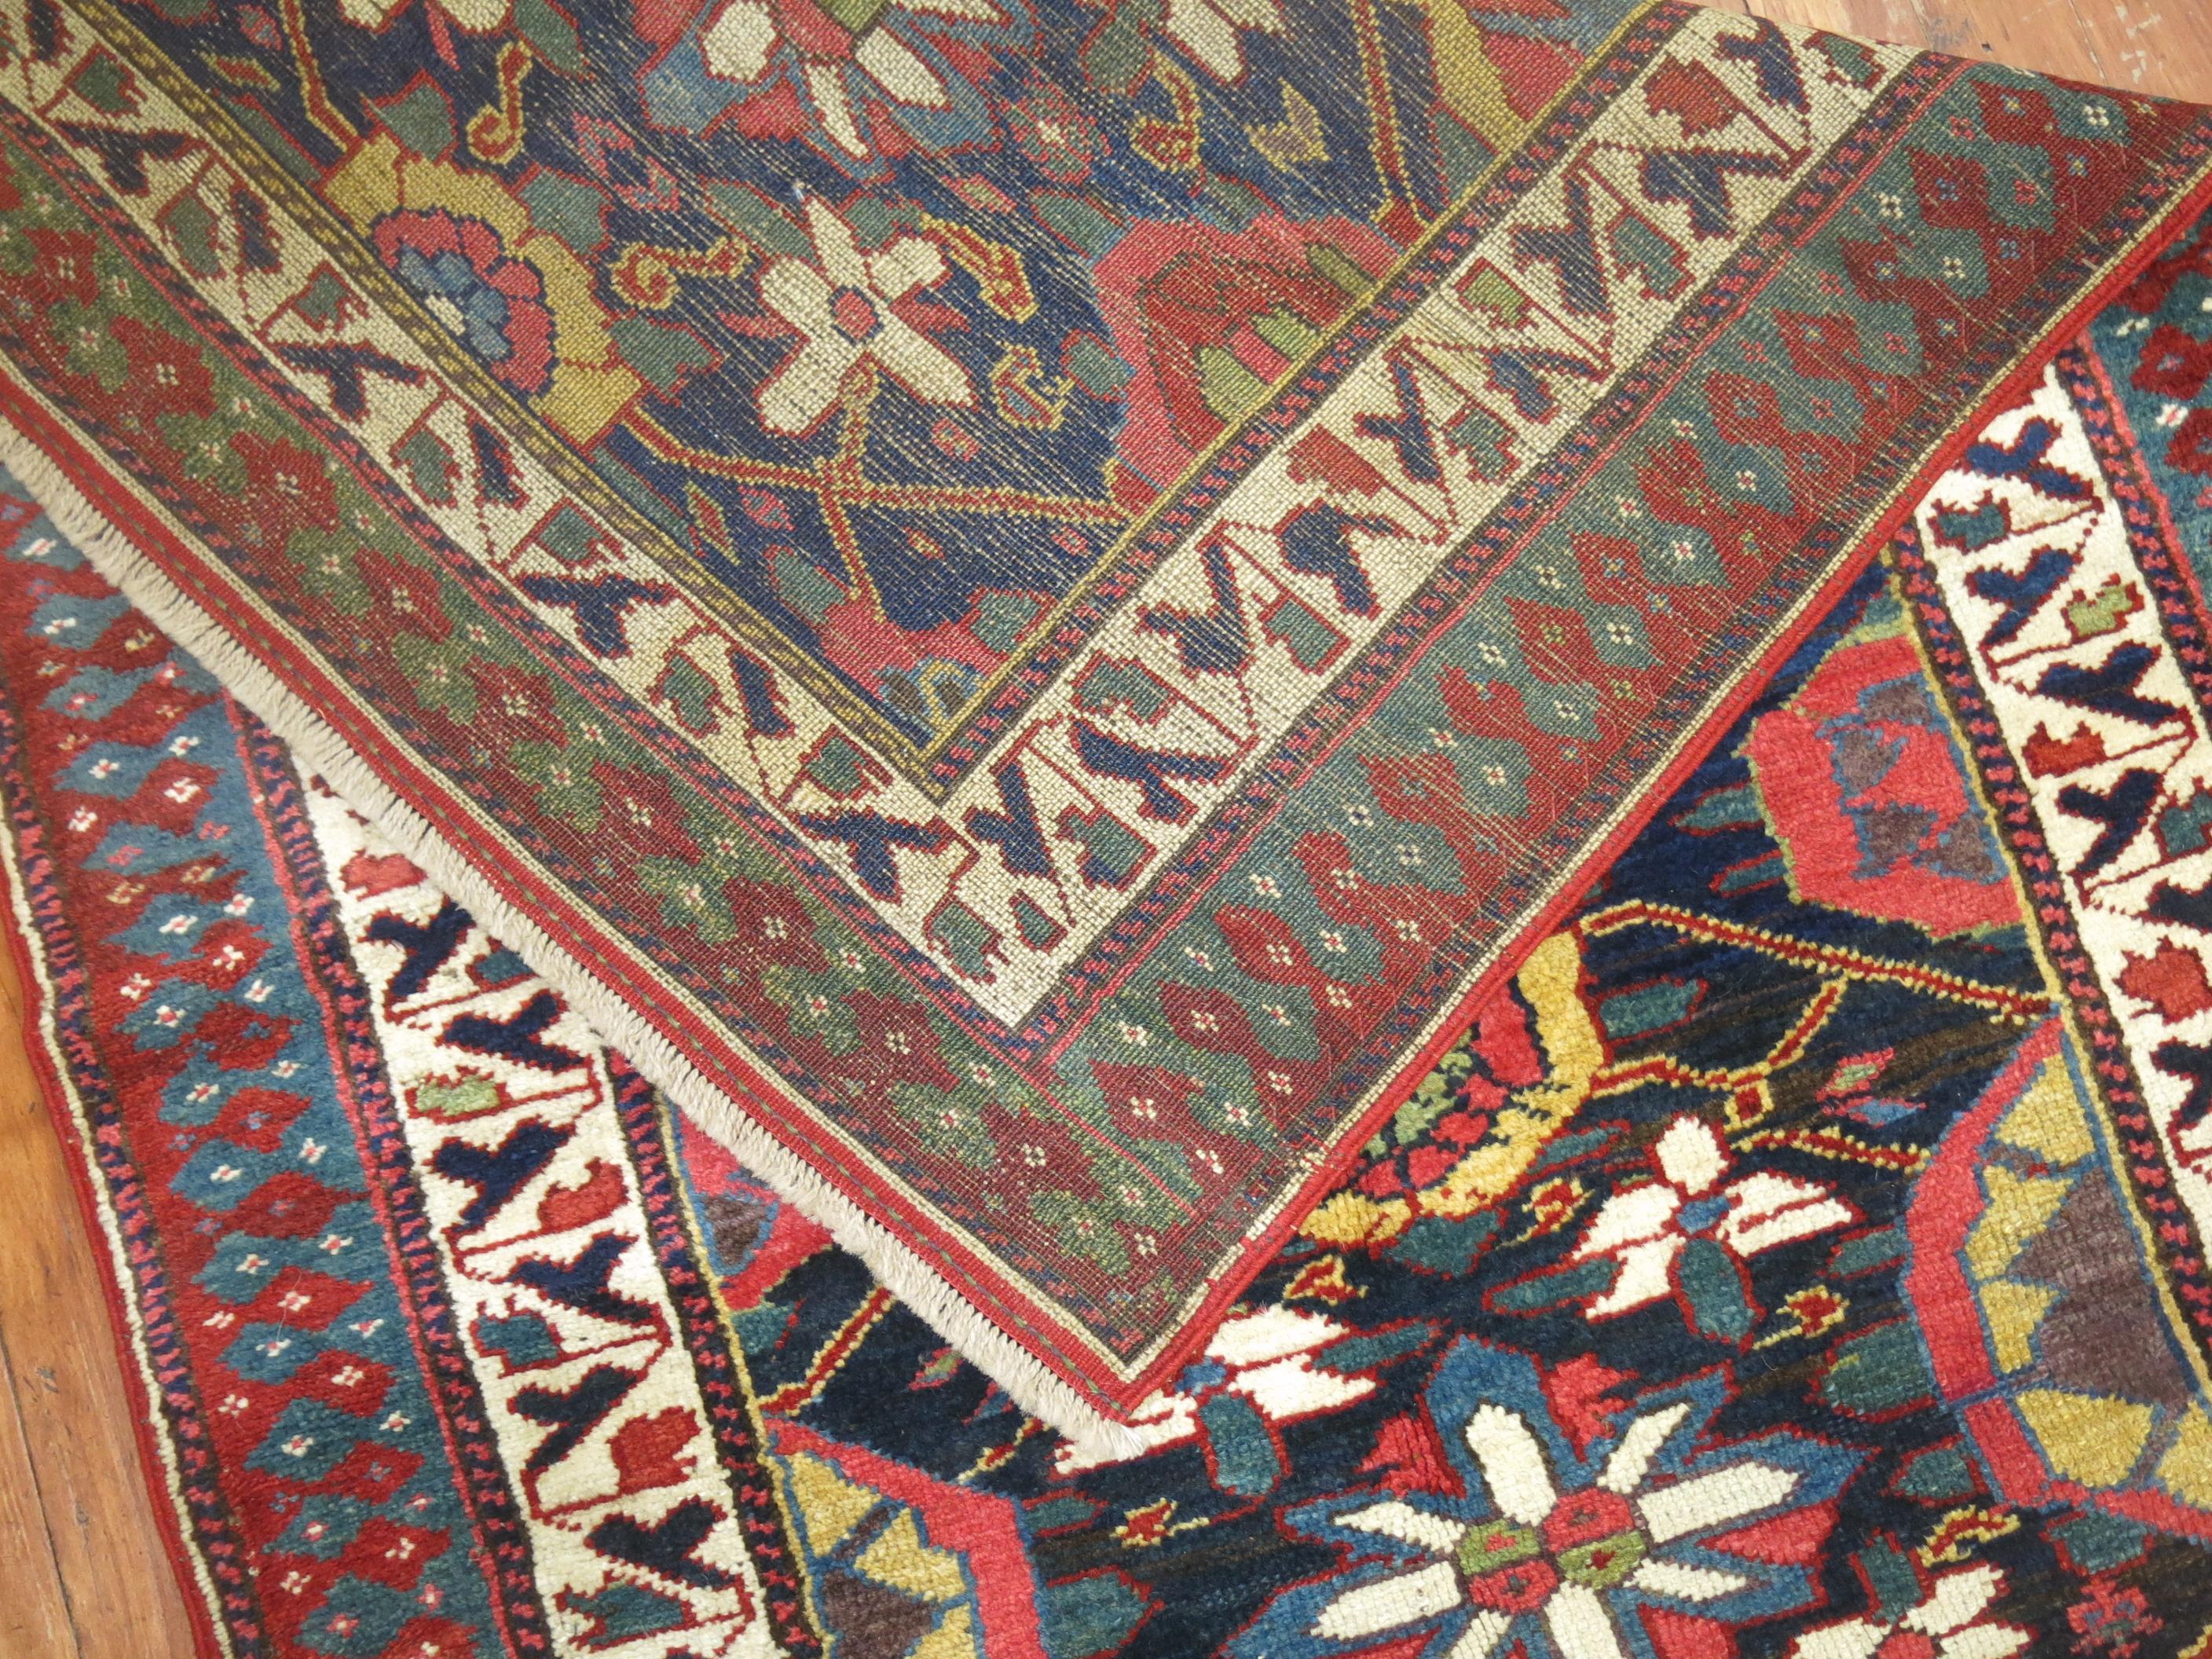 Highly decorative long runner Persian Varamin runner from the early 20th century. 

Measures: 2'11'' x 17'5''

Varamin carpets and rugs or Veramin carpets and rugs are carpets and rugs woven in city of Varamin and its surrounding area which are